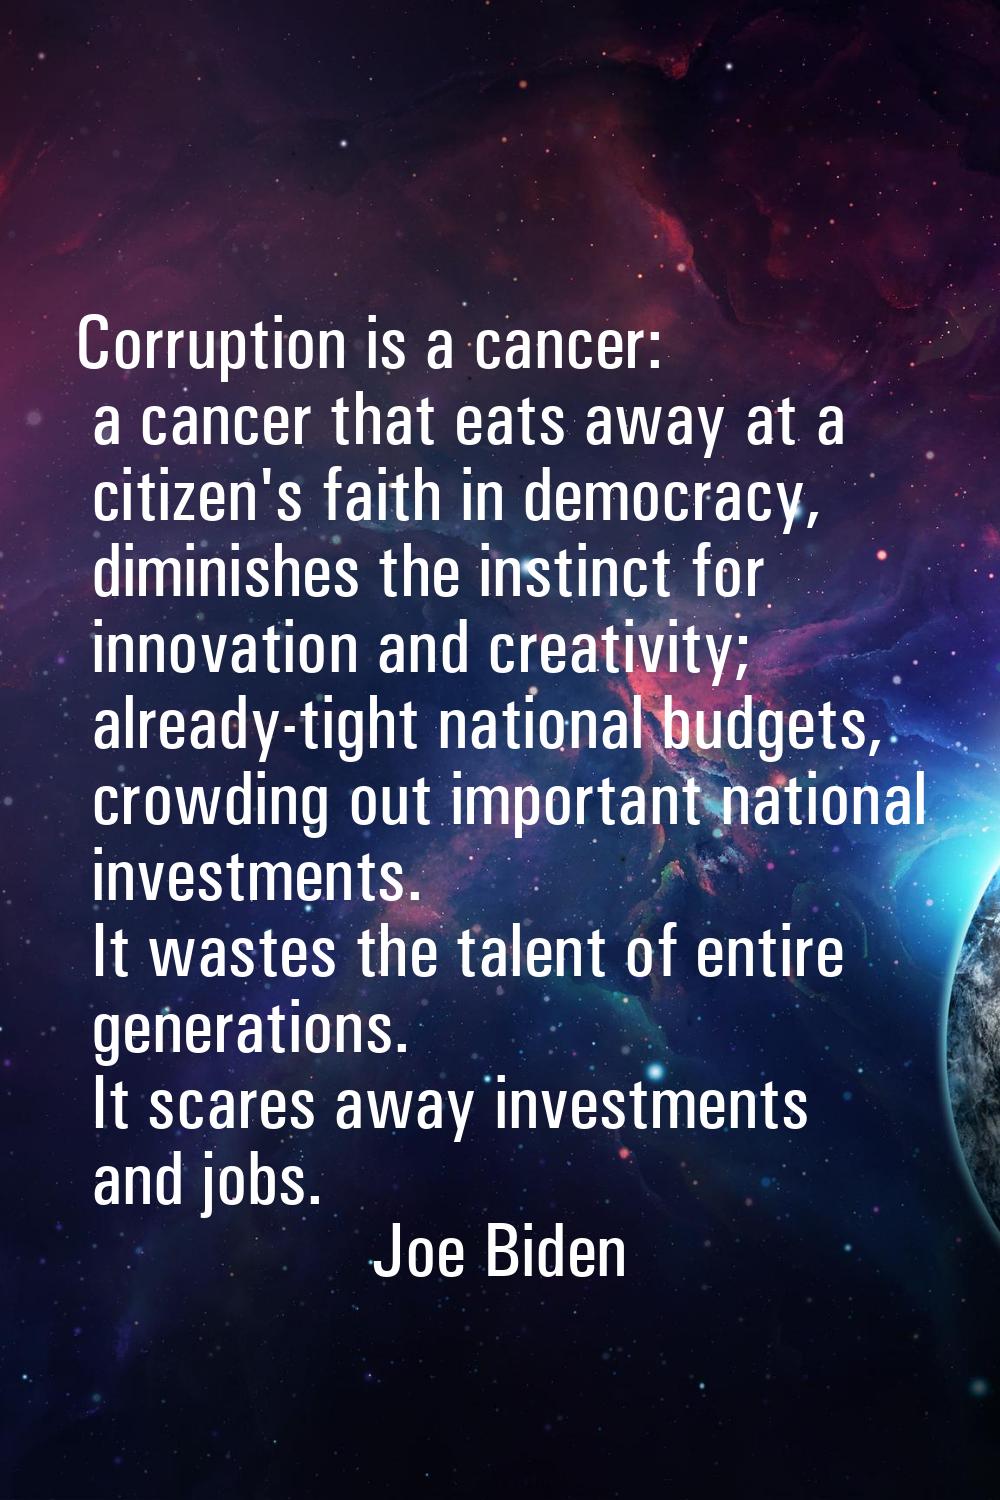 Corruption is a cancer: a cancer that eats away at a citizen's faith in democracy, diminishes the i